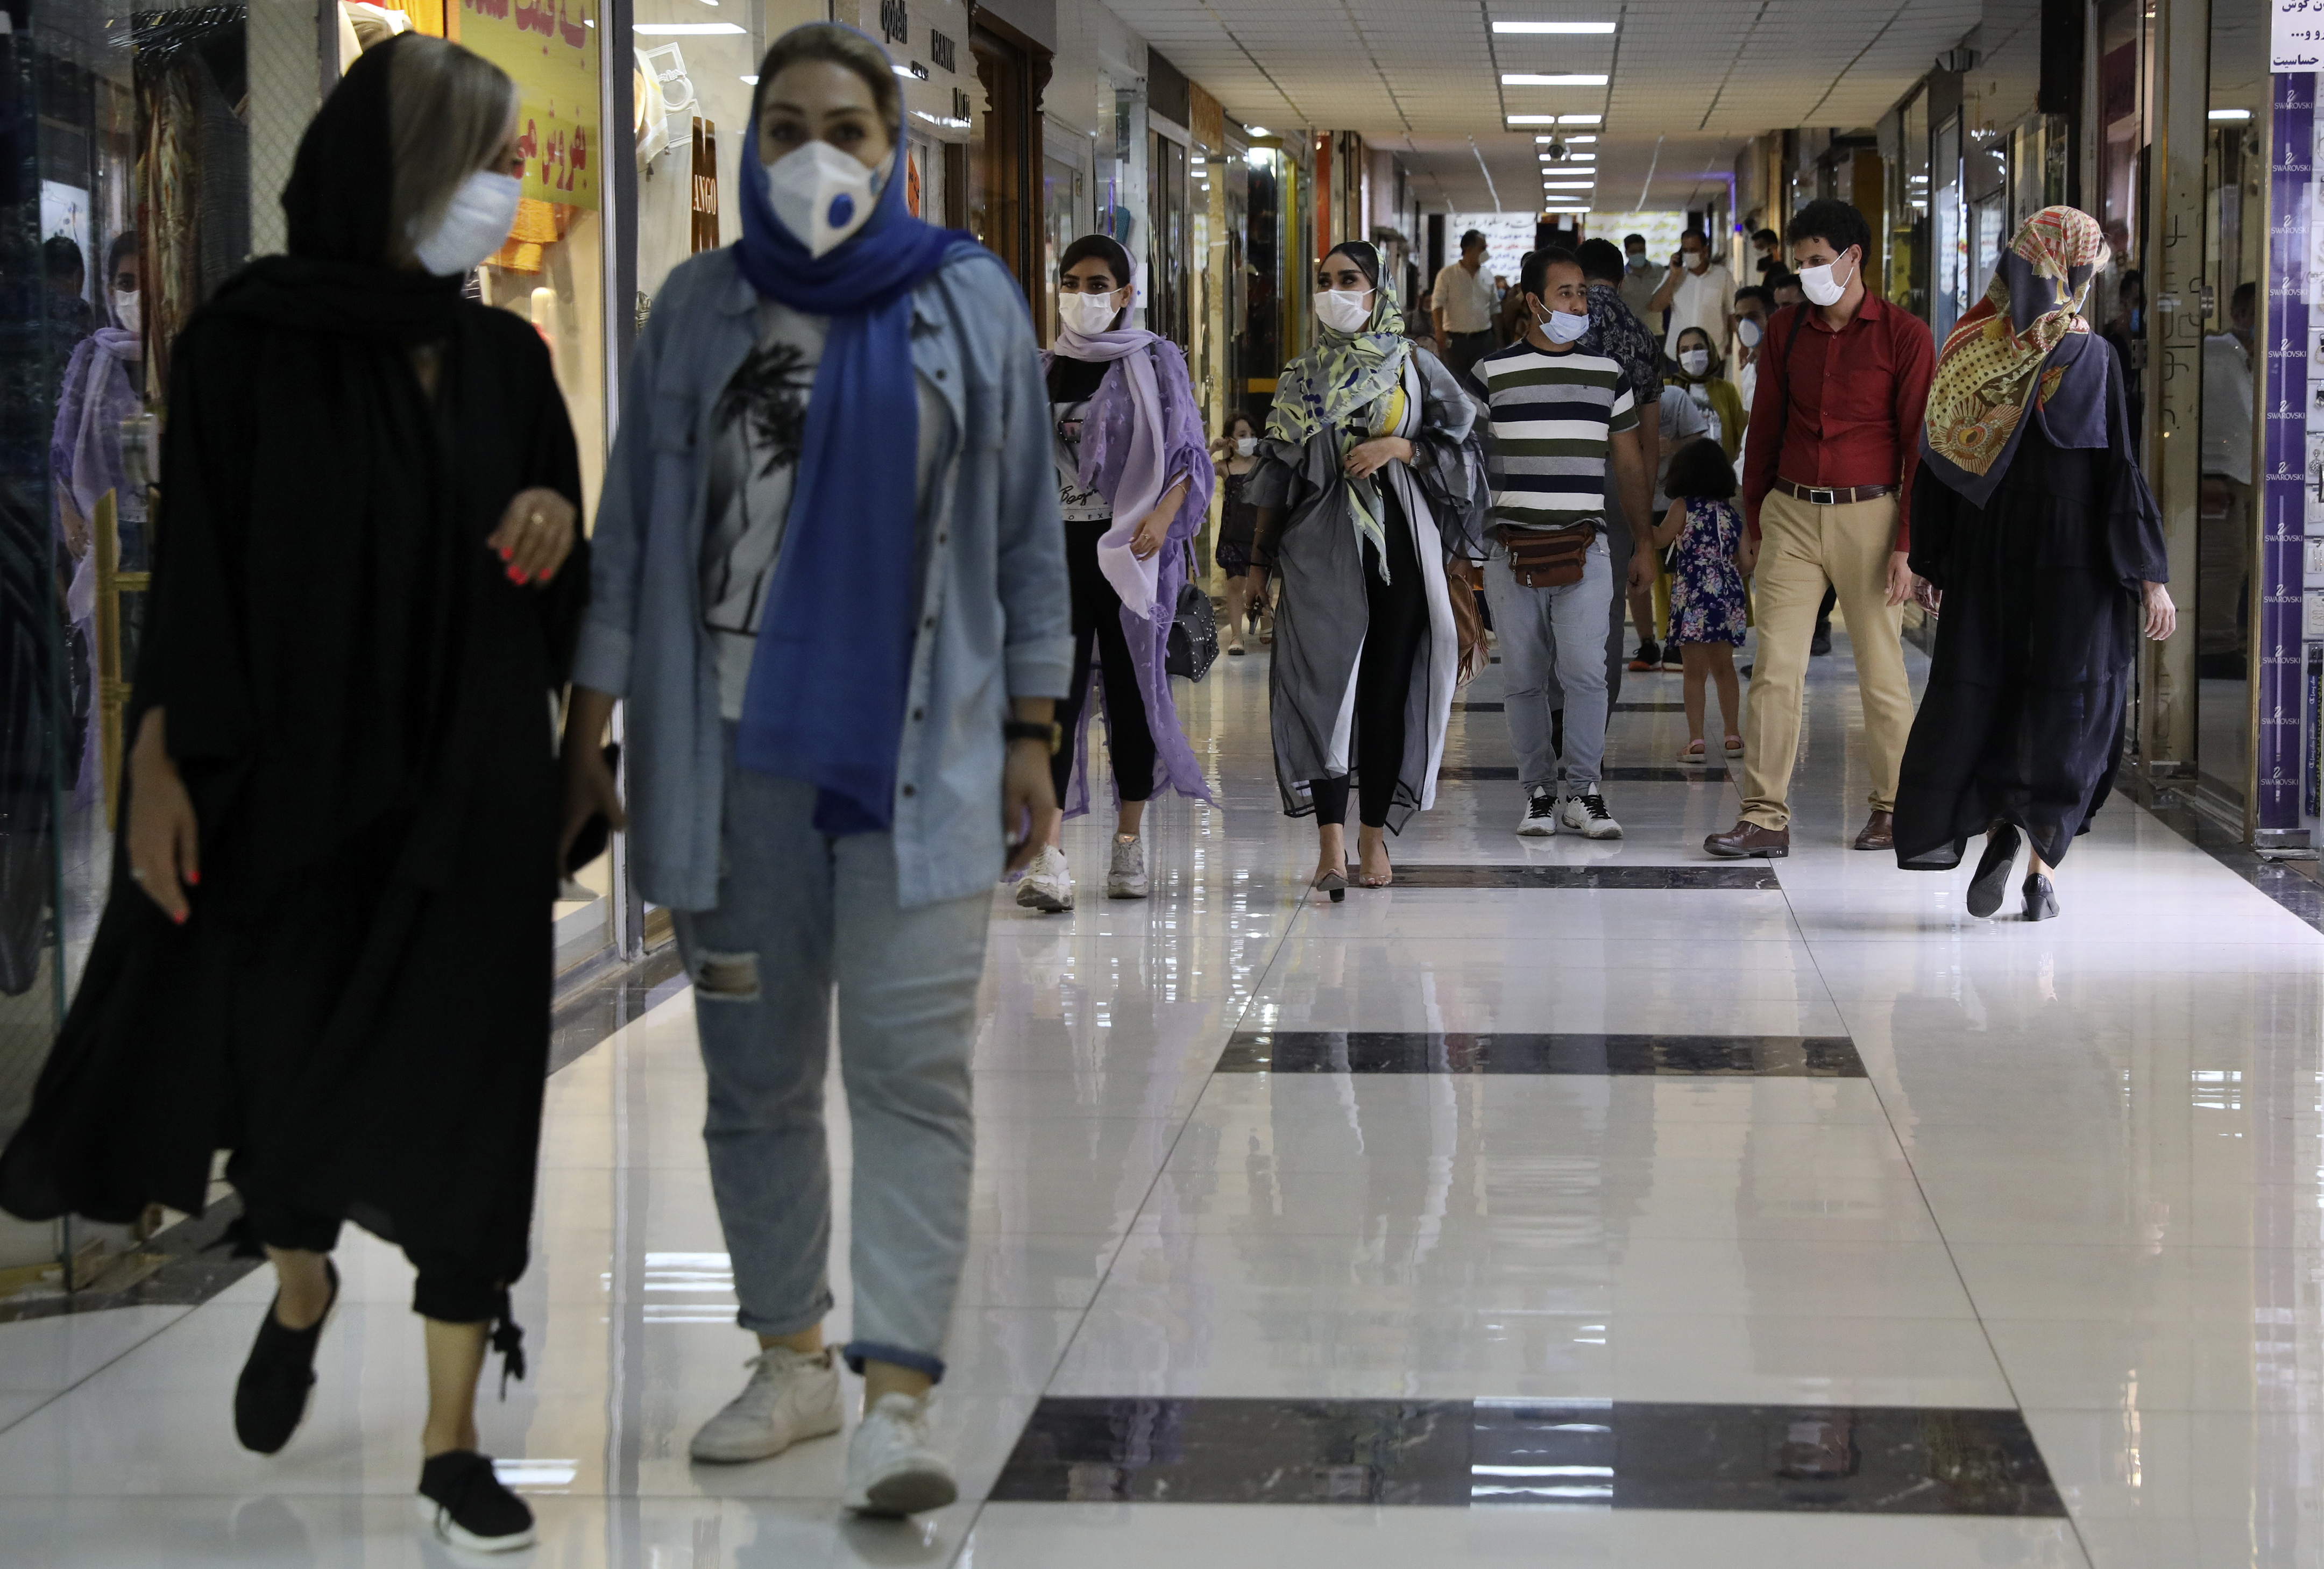 People wearing protective face masks to help prevent the spread of the coronavirus walk through the Nasr Shopping Center in Tehran, Iran, Wednesday, July 15, 2020. Iran's President Hassan Rouhani has said lockdowns over COVID-19 pandemic may lead to street protests over economic problems, though in Tehran, authorities have decided to impose some restrictions again over newly spiking reported deaths from the coronavirus. (AP Photo/Vahid Salemi)